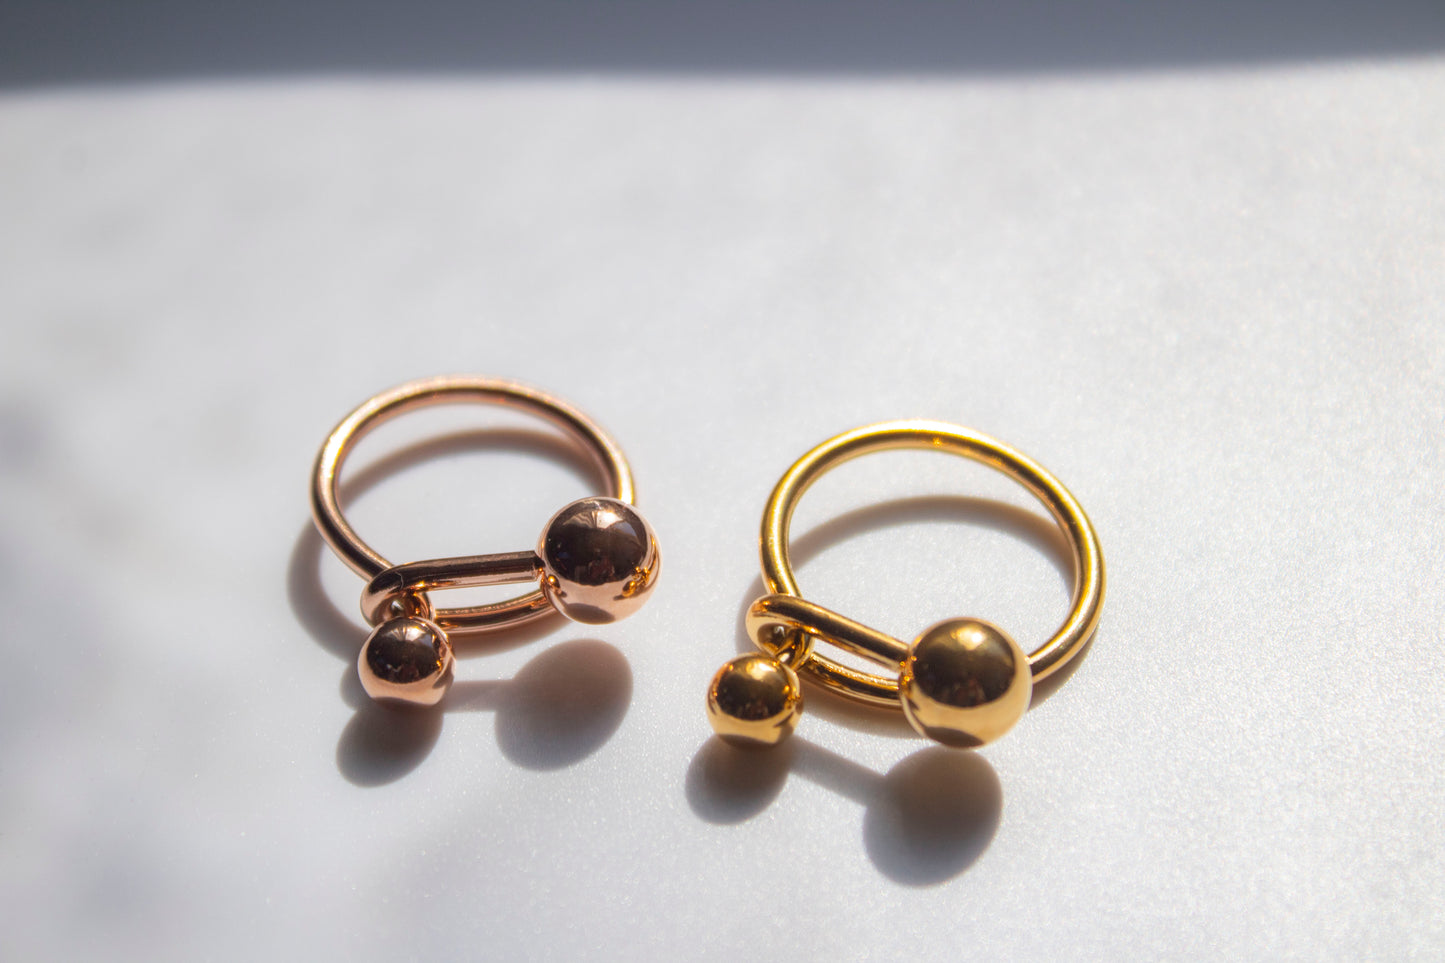 The Smooth Ball Back Ring